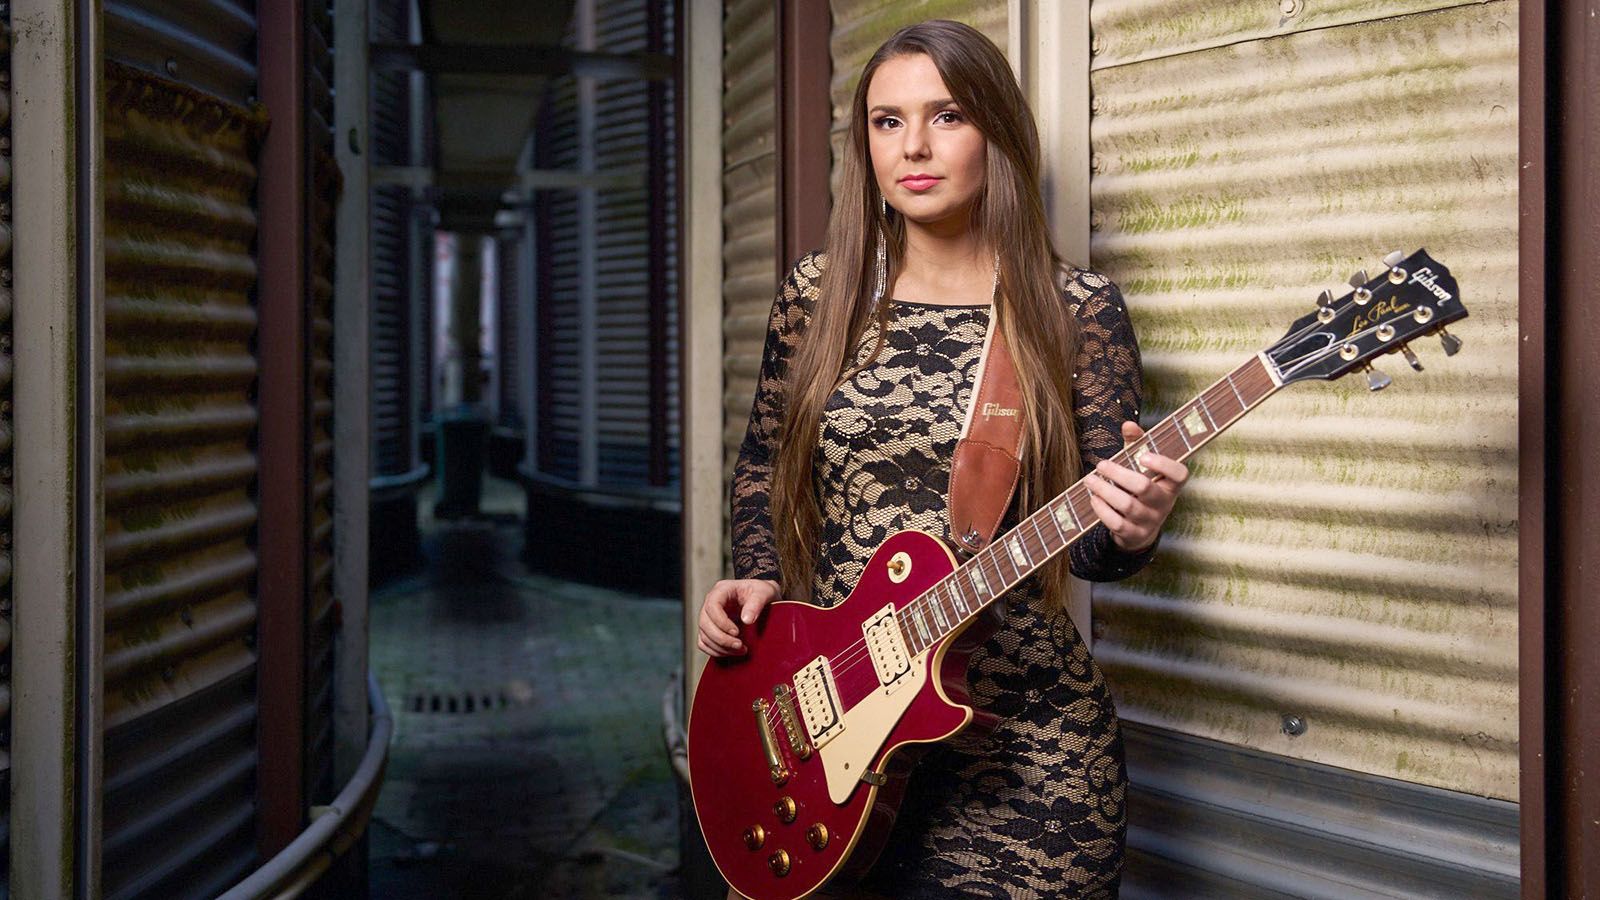 Ally Venable will bring the blues to Baker Street Centre on Saturday, March 9.